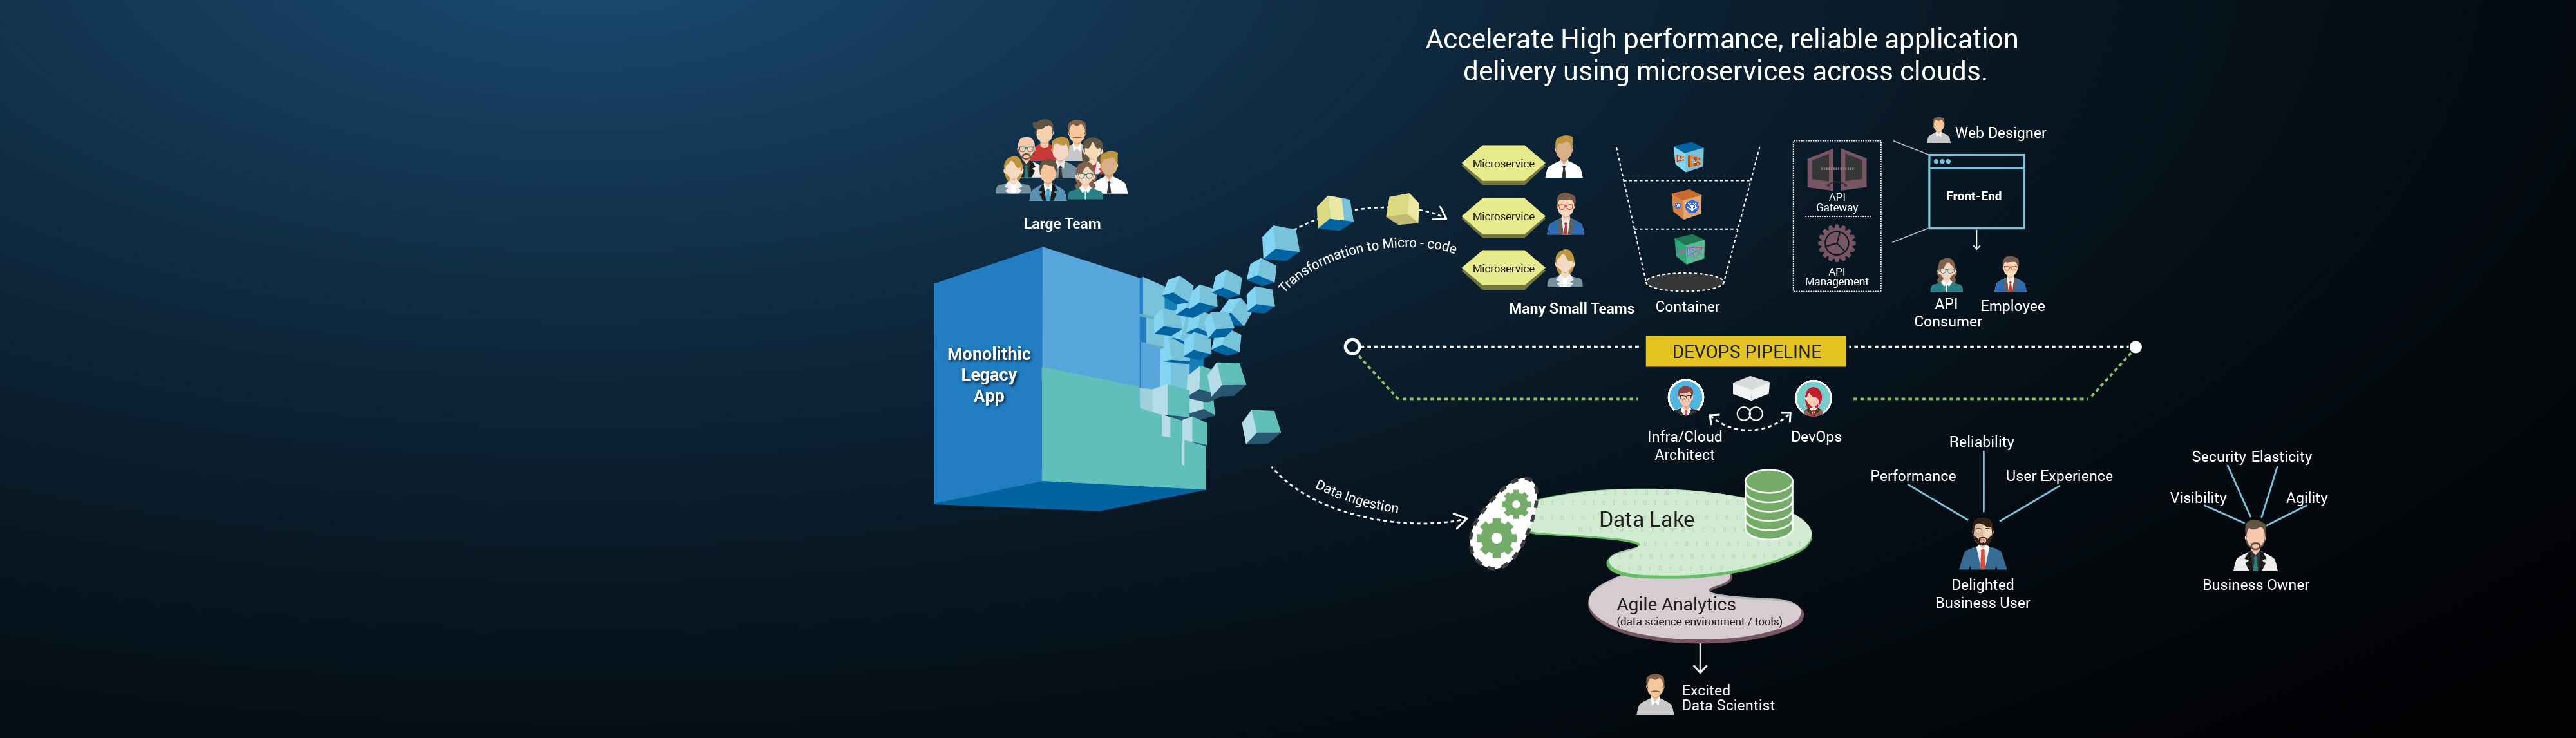 modernize your business, adopt cloud native microservices architecture